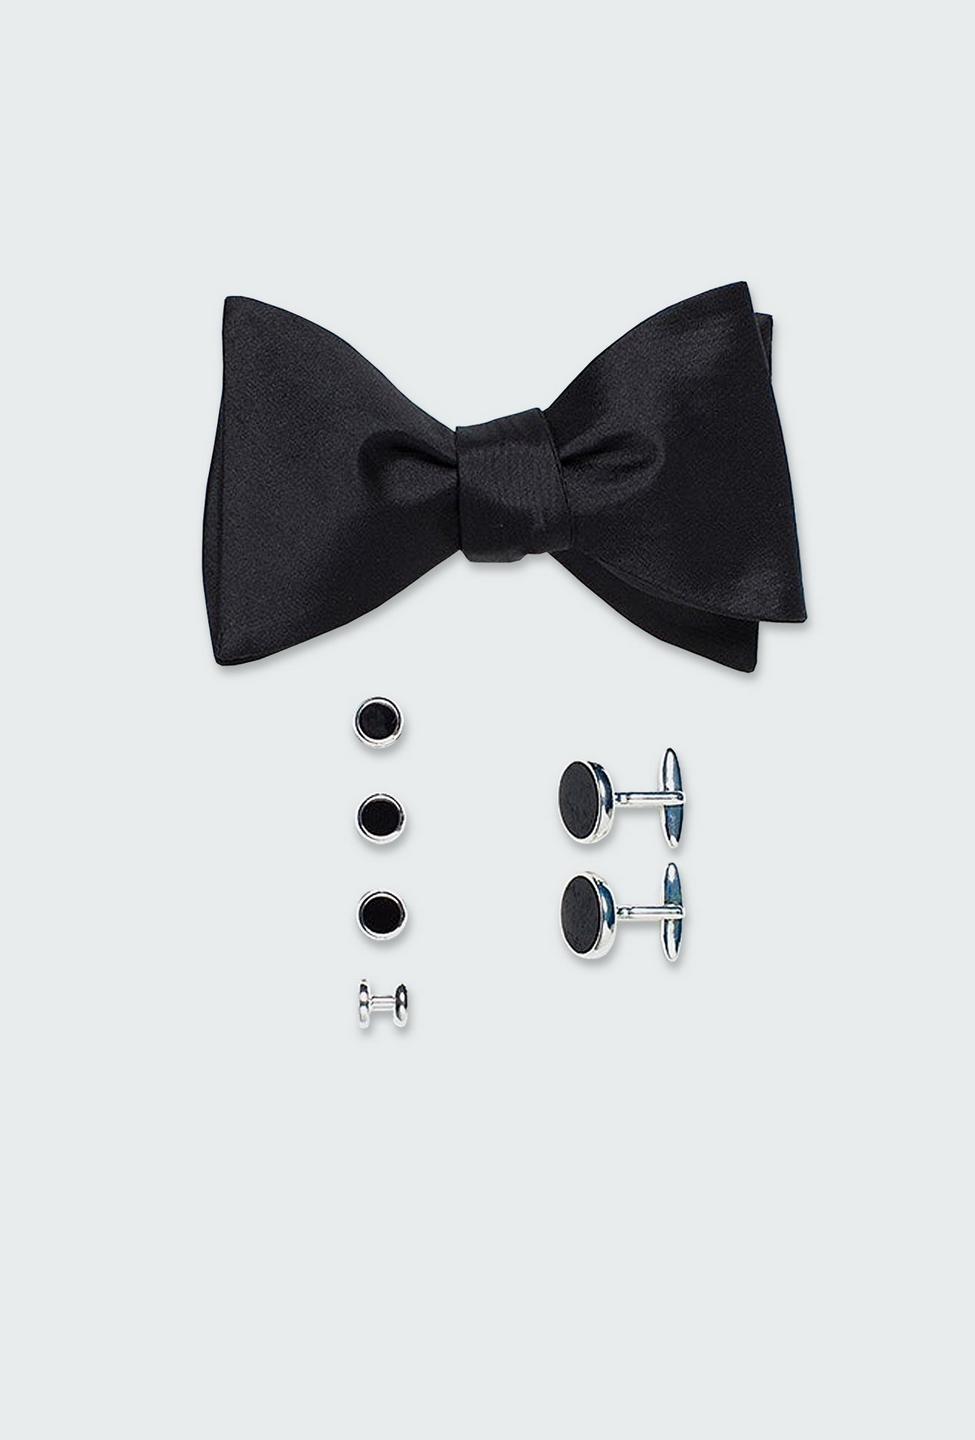 Black tie - Solid Design from Premium Indochino Collection